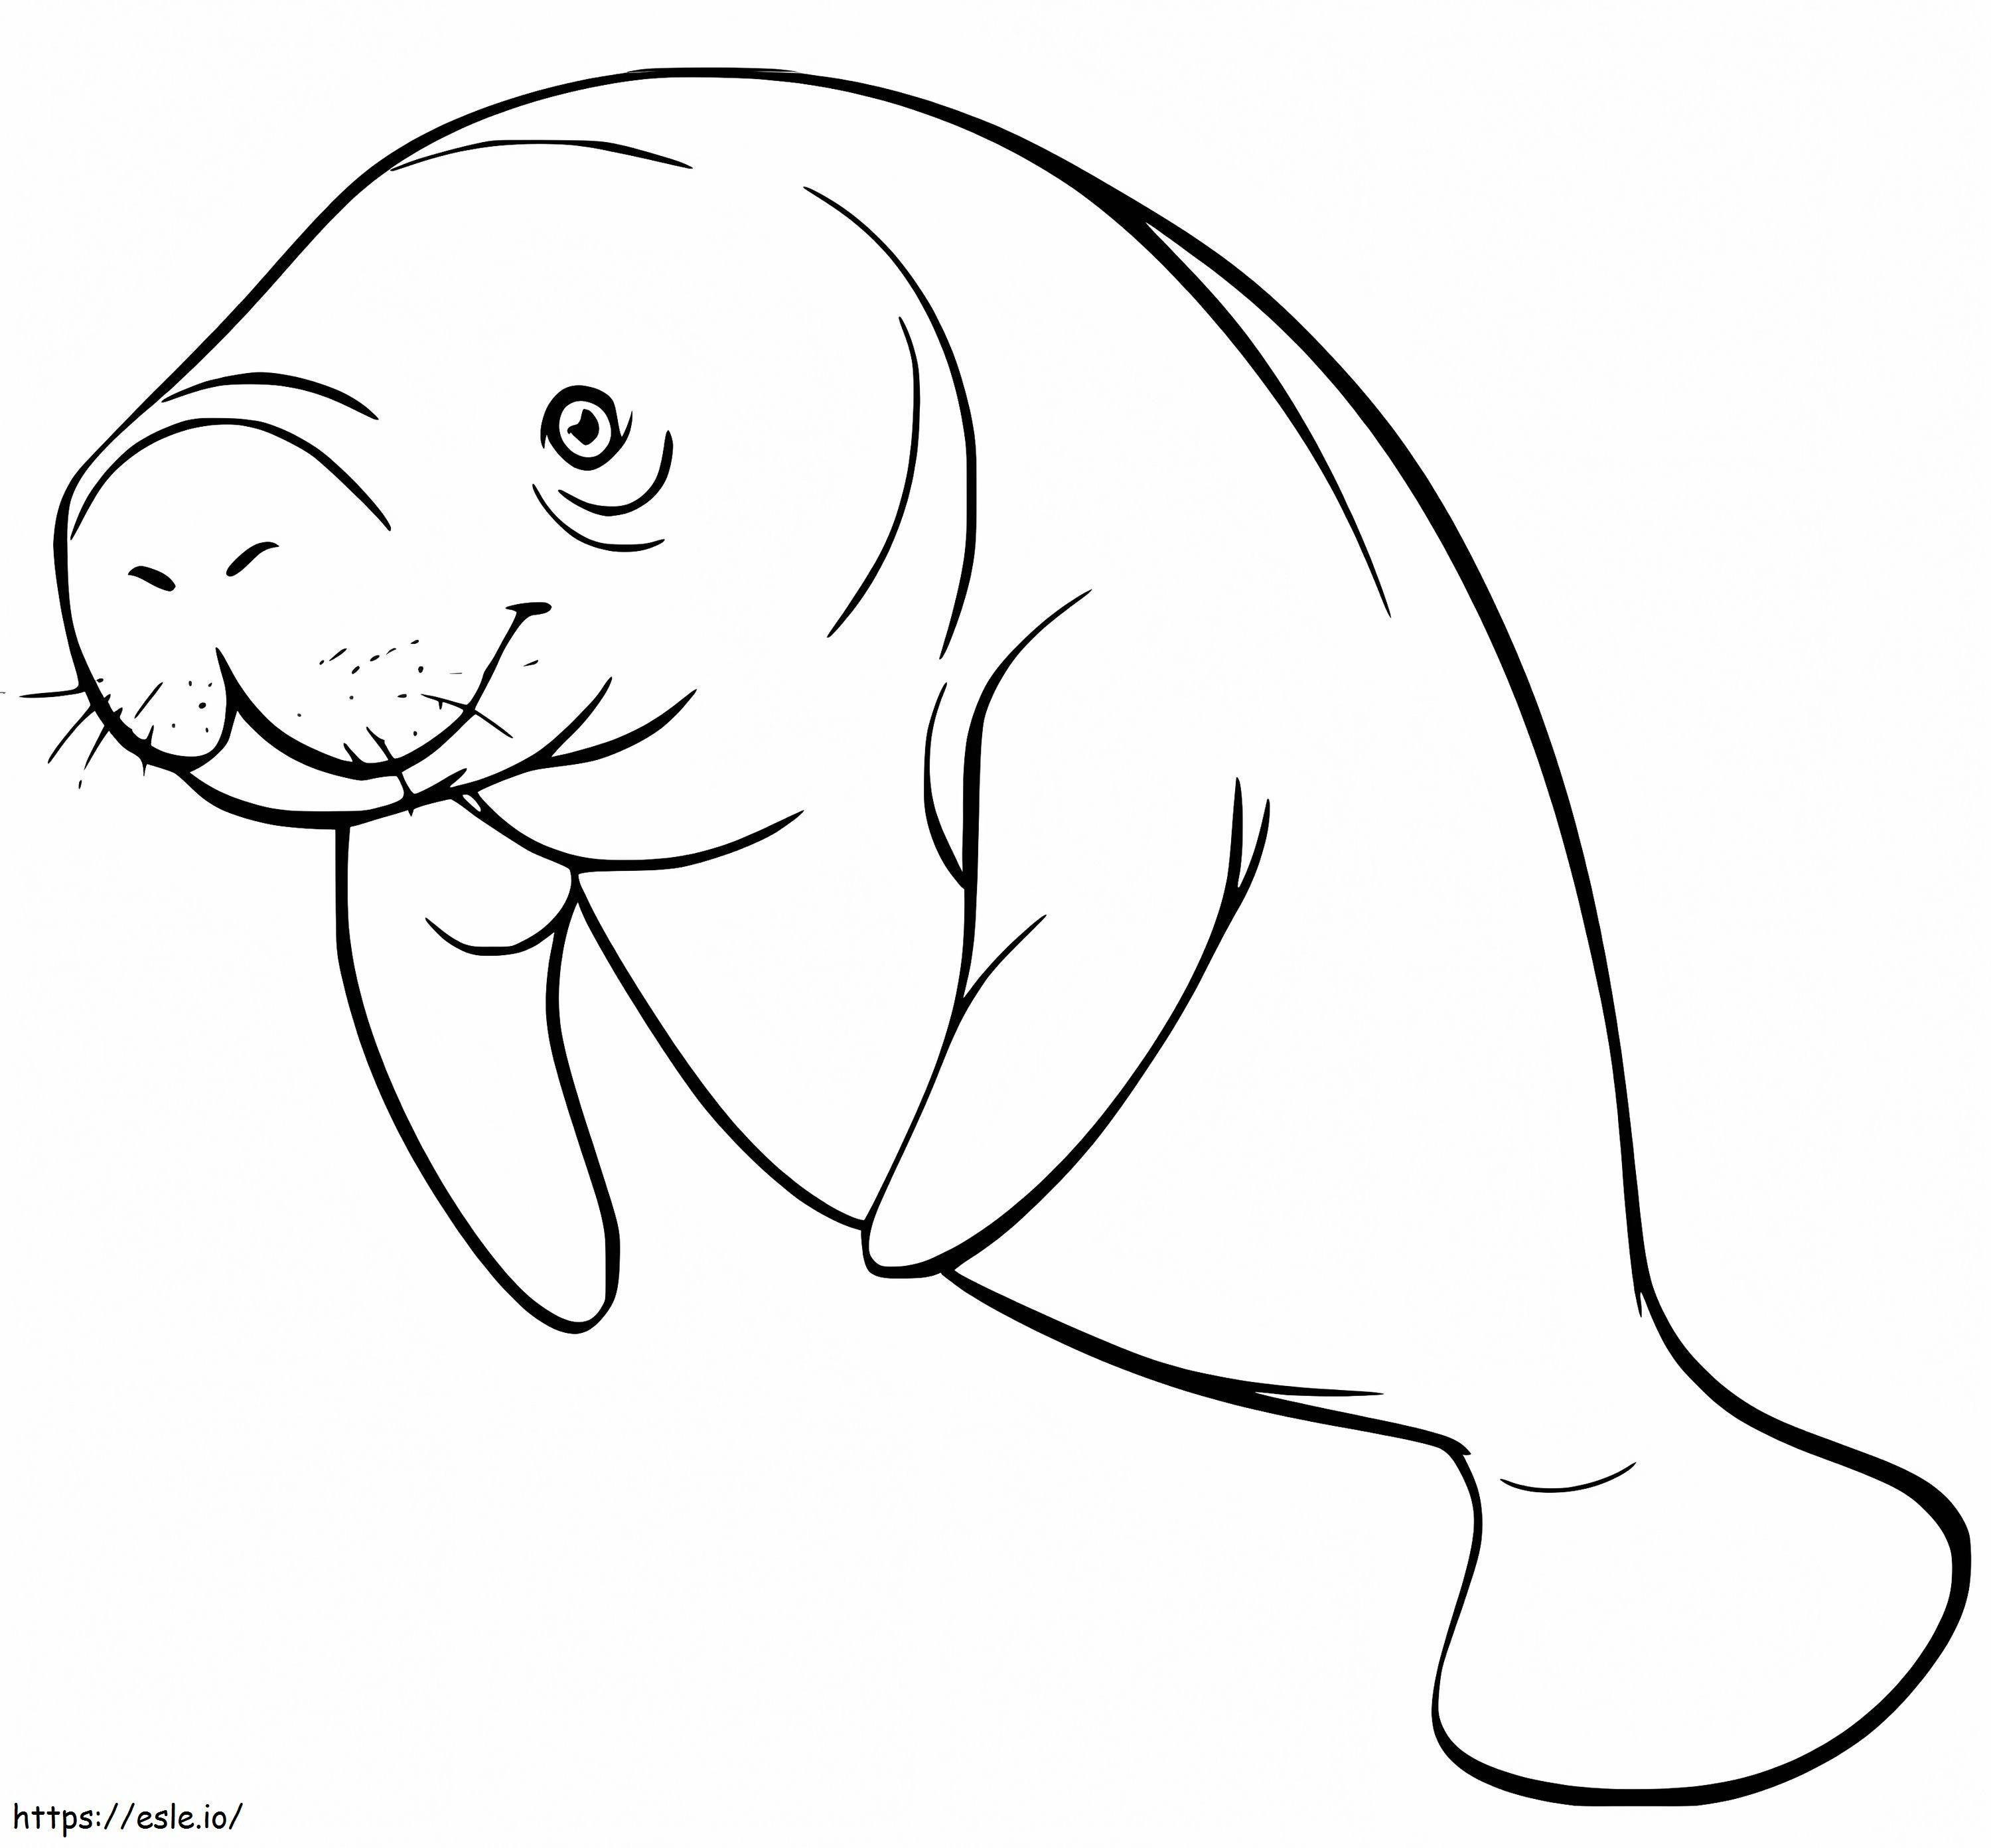 Normal Manatee coloring page